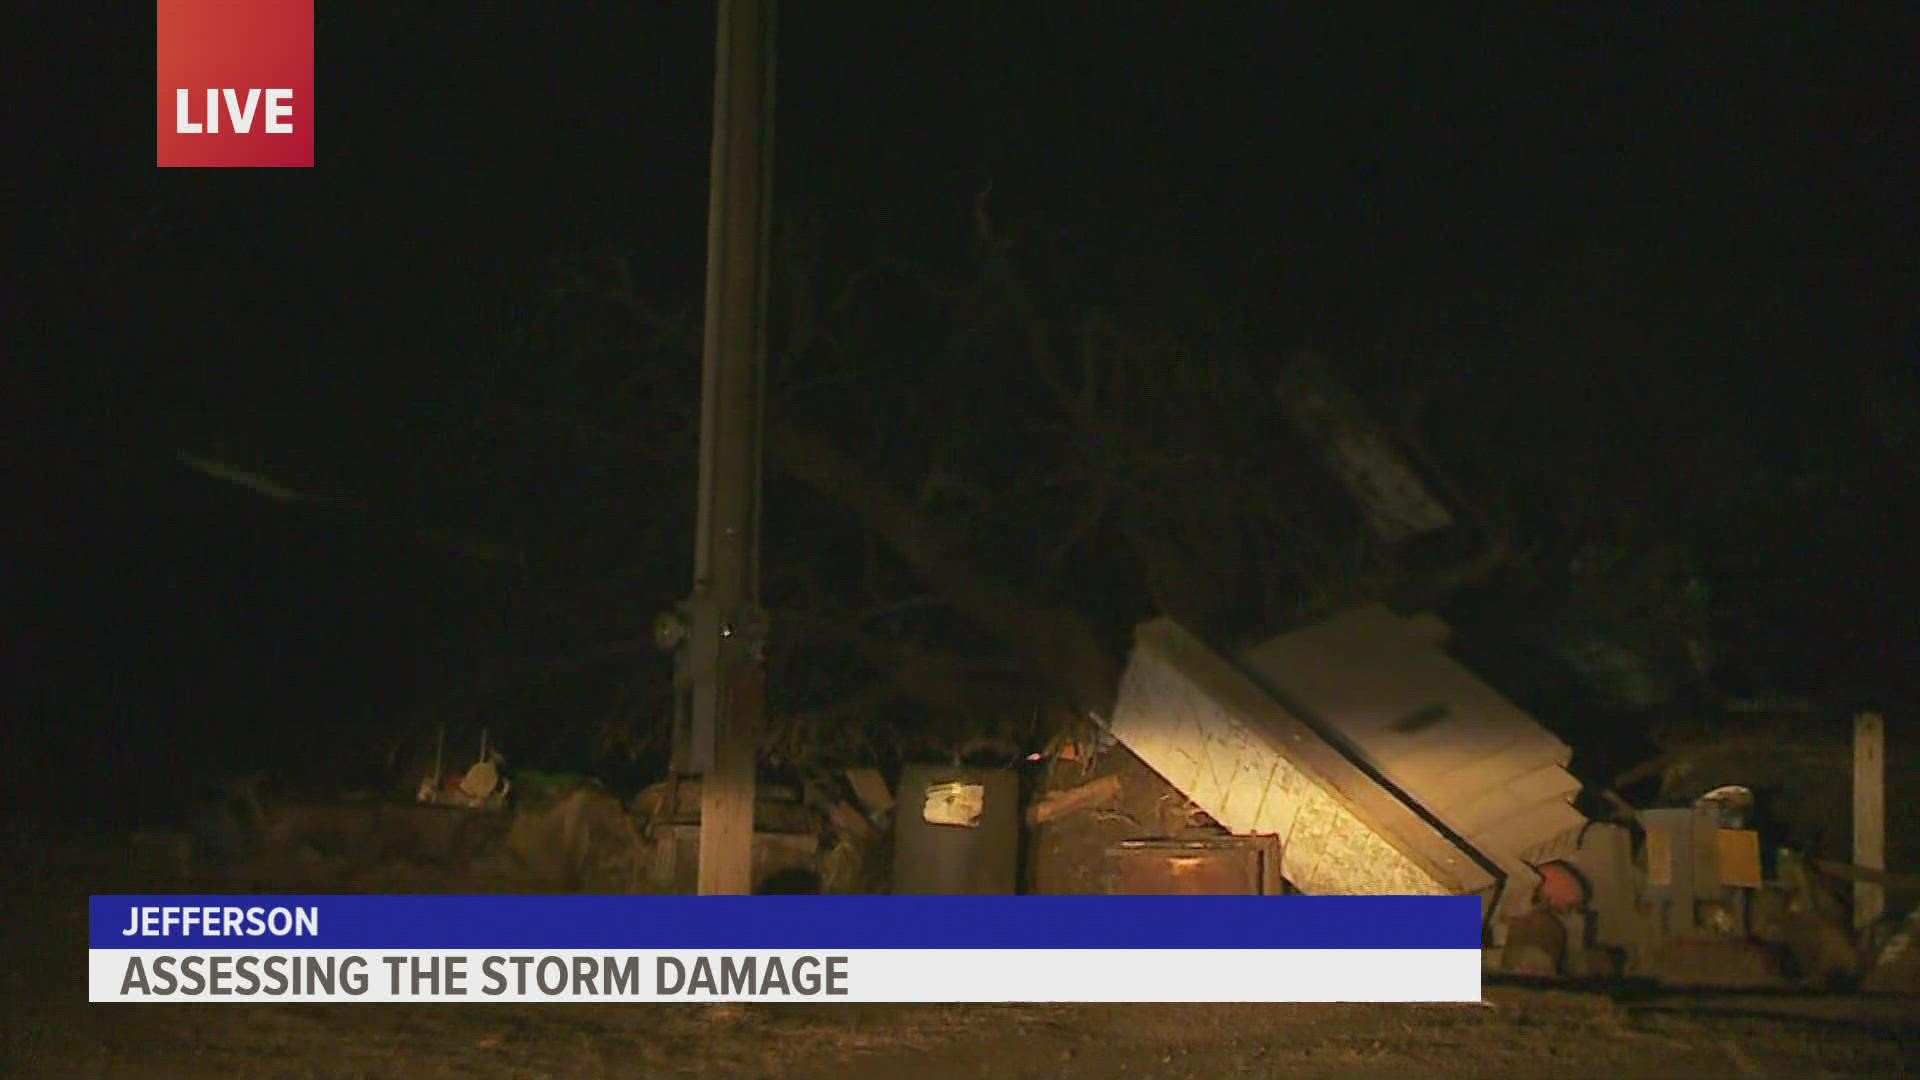 Local 5 was in Jefferson Wednesday night to check on damage reports.